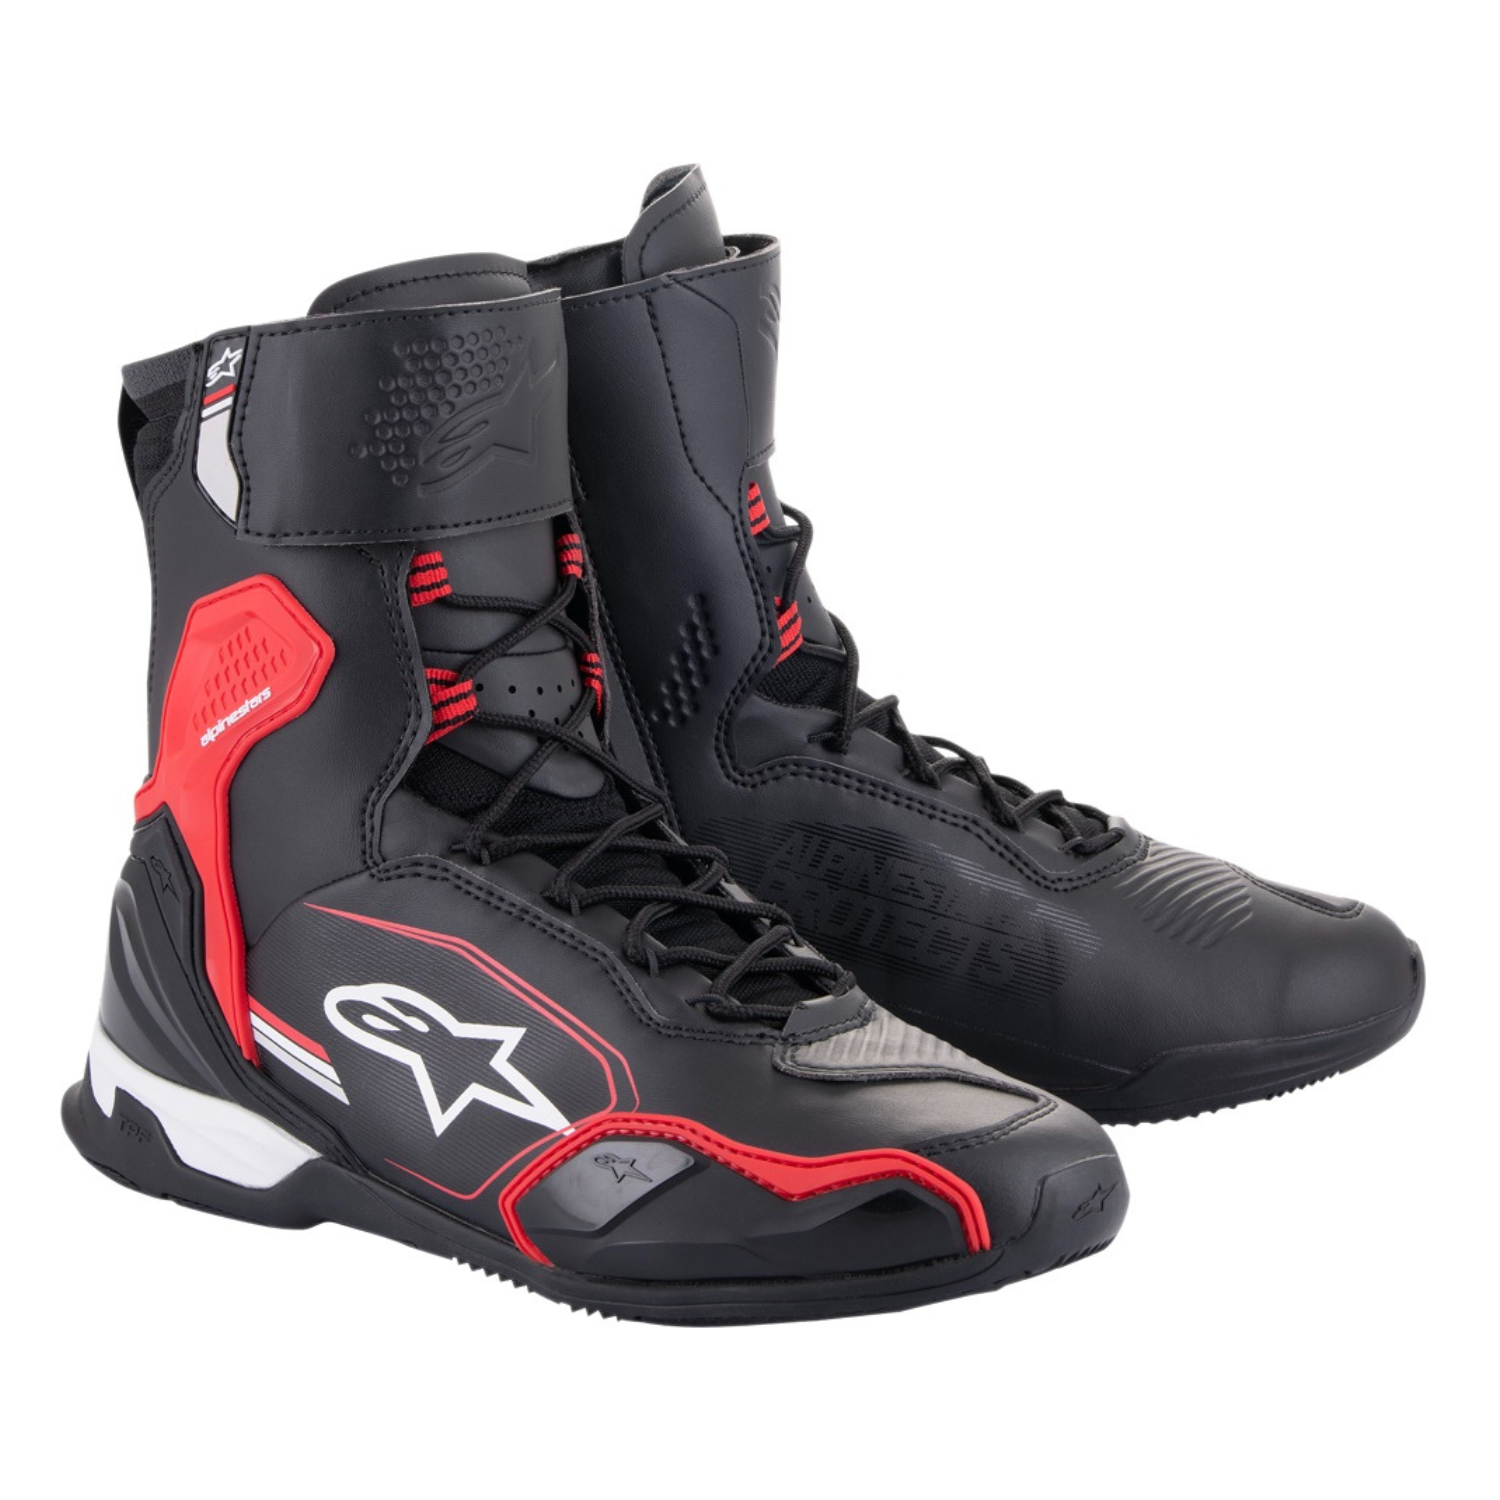 Image of Alpinestars Superfaster Shoes Black Bright Red White Size US 105 ID 8059347260983